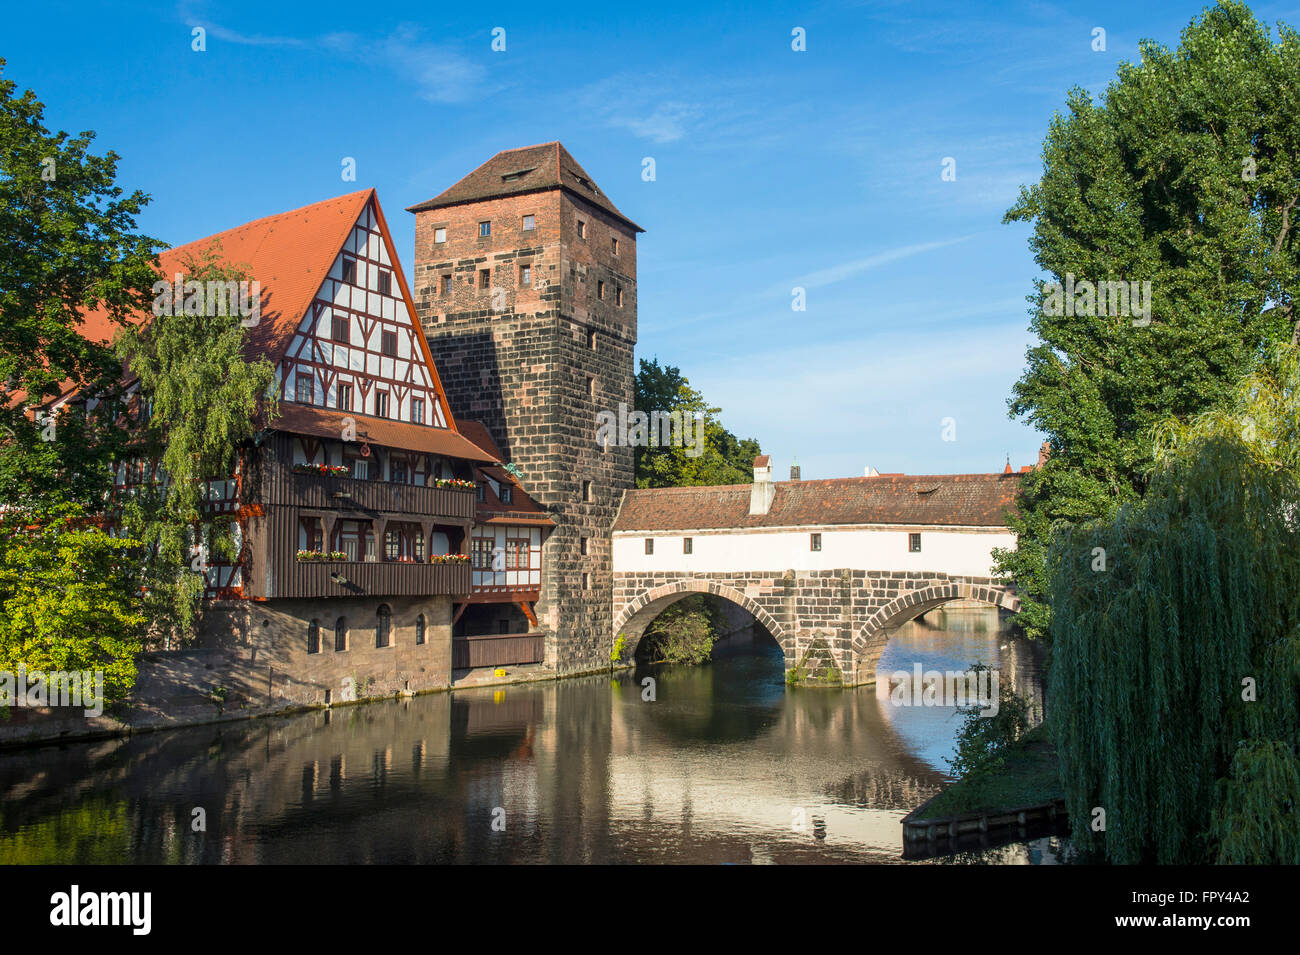 Old half-timbered house and water tower by the river Pegnitz, Nuremberg, Middle Franconia, Bavaria, Germany Stock Photo